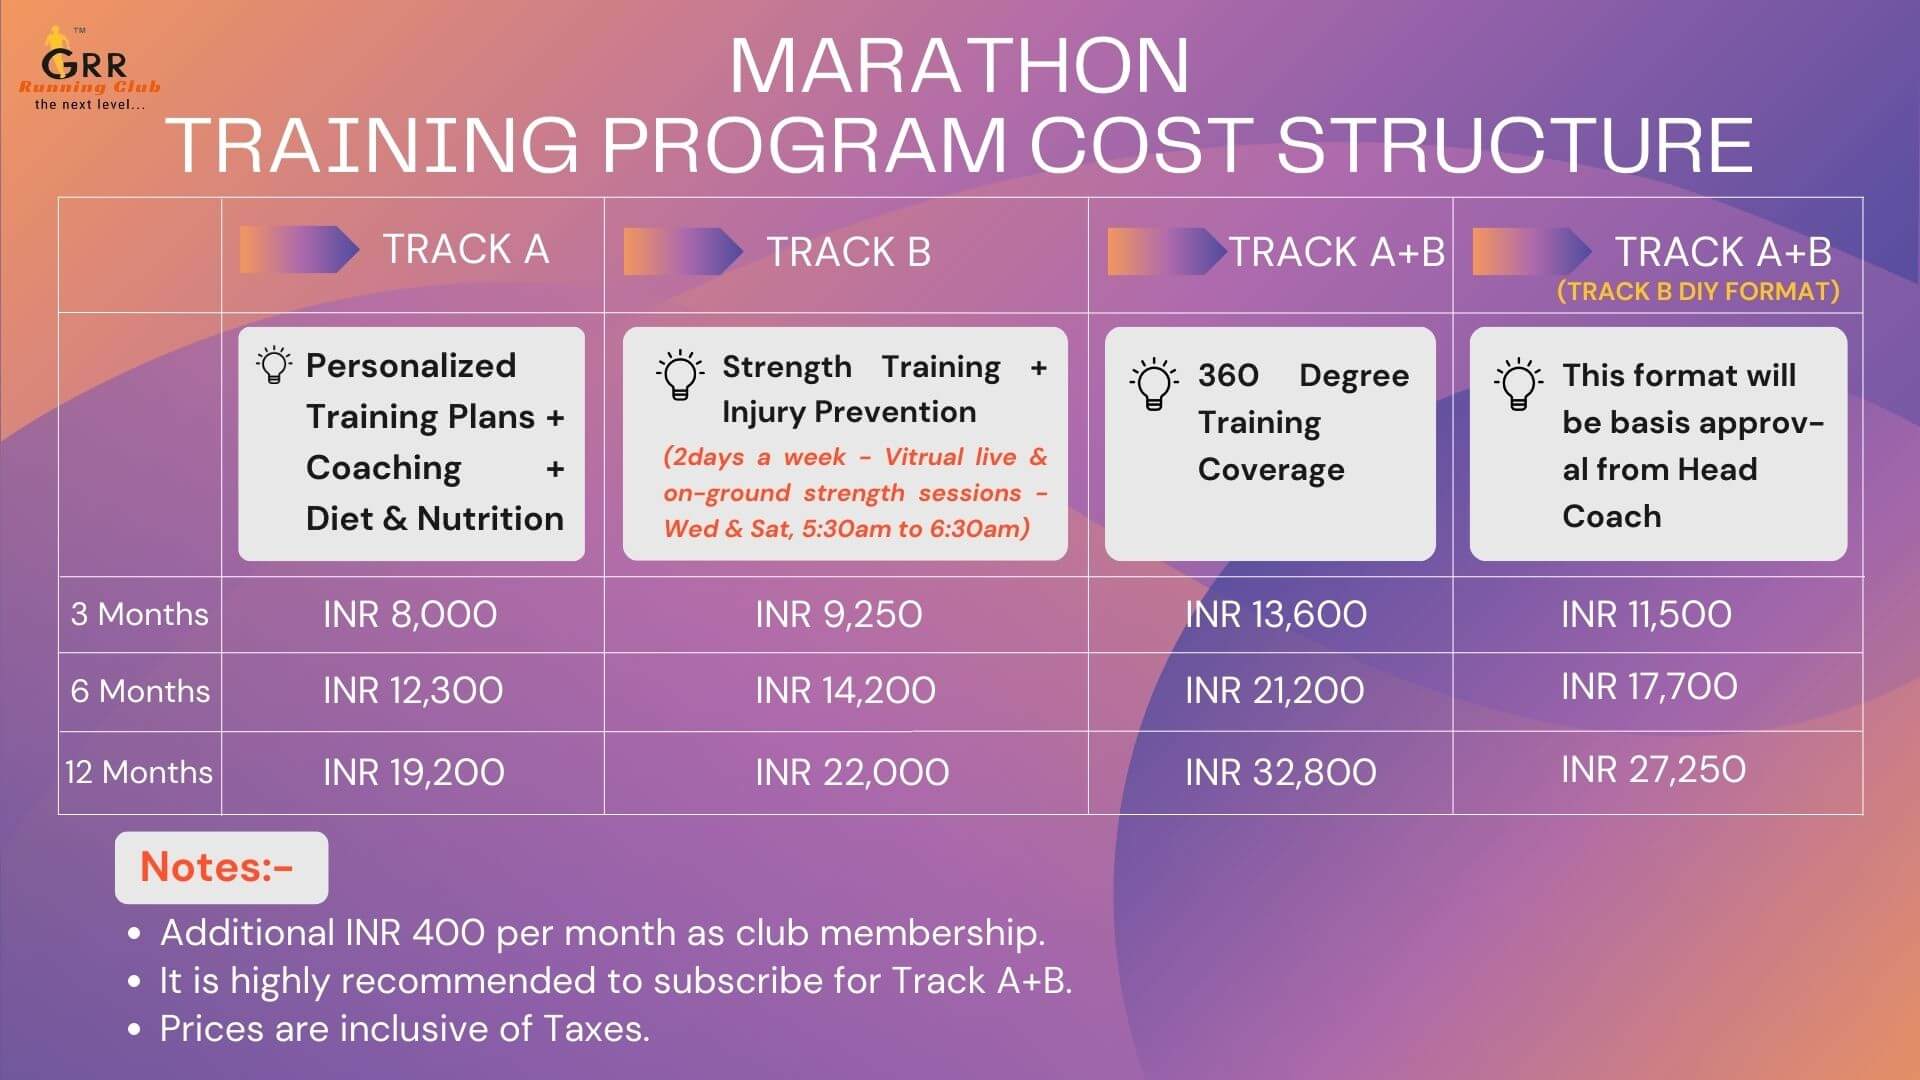 Cost Deatils for GRR Running Club